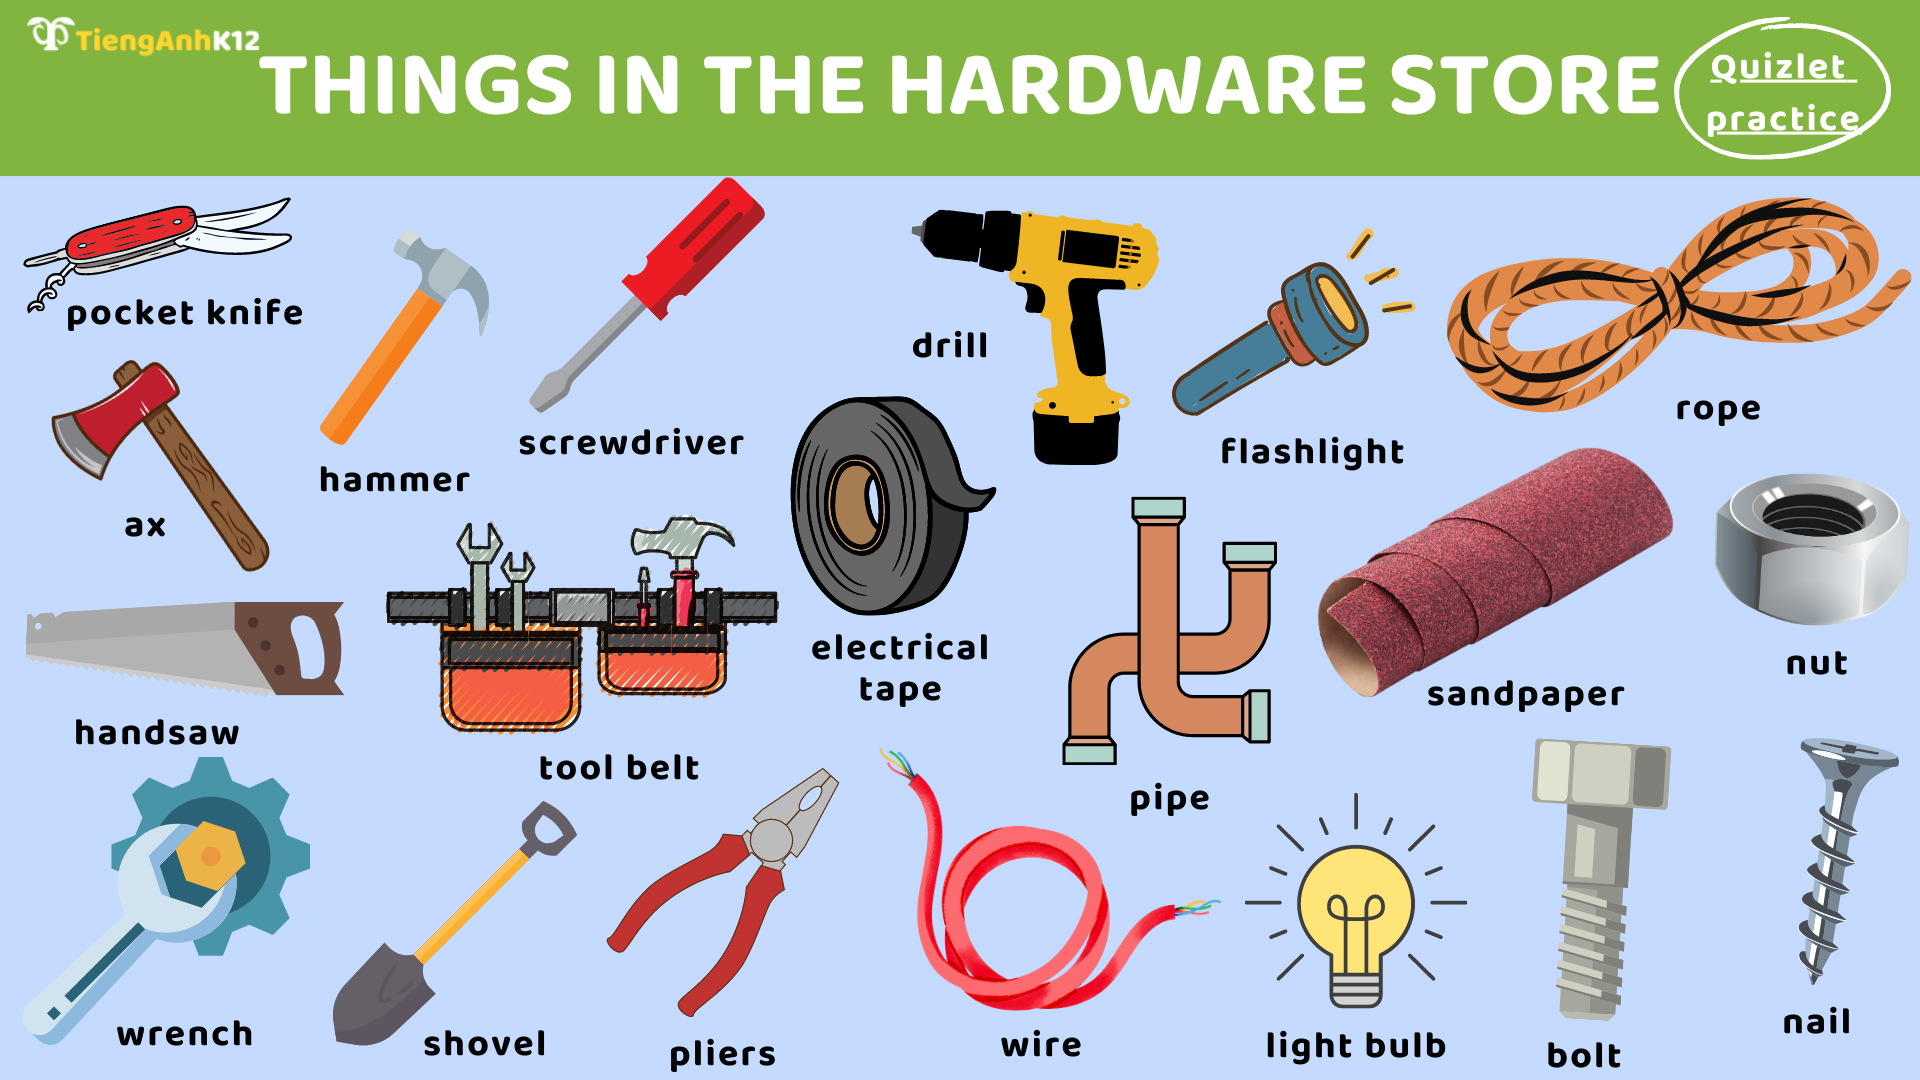 Từ vựng Toefl Primary Step 2 - Things in the hardware store